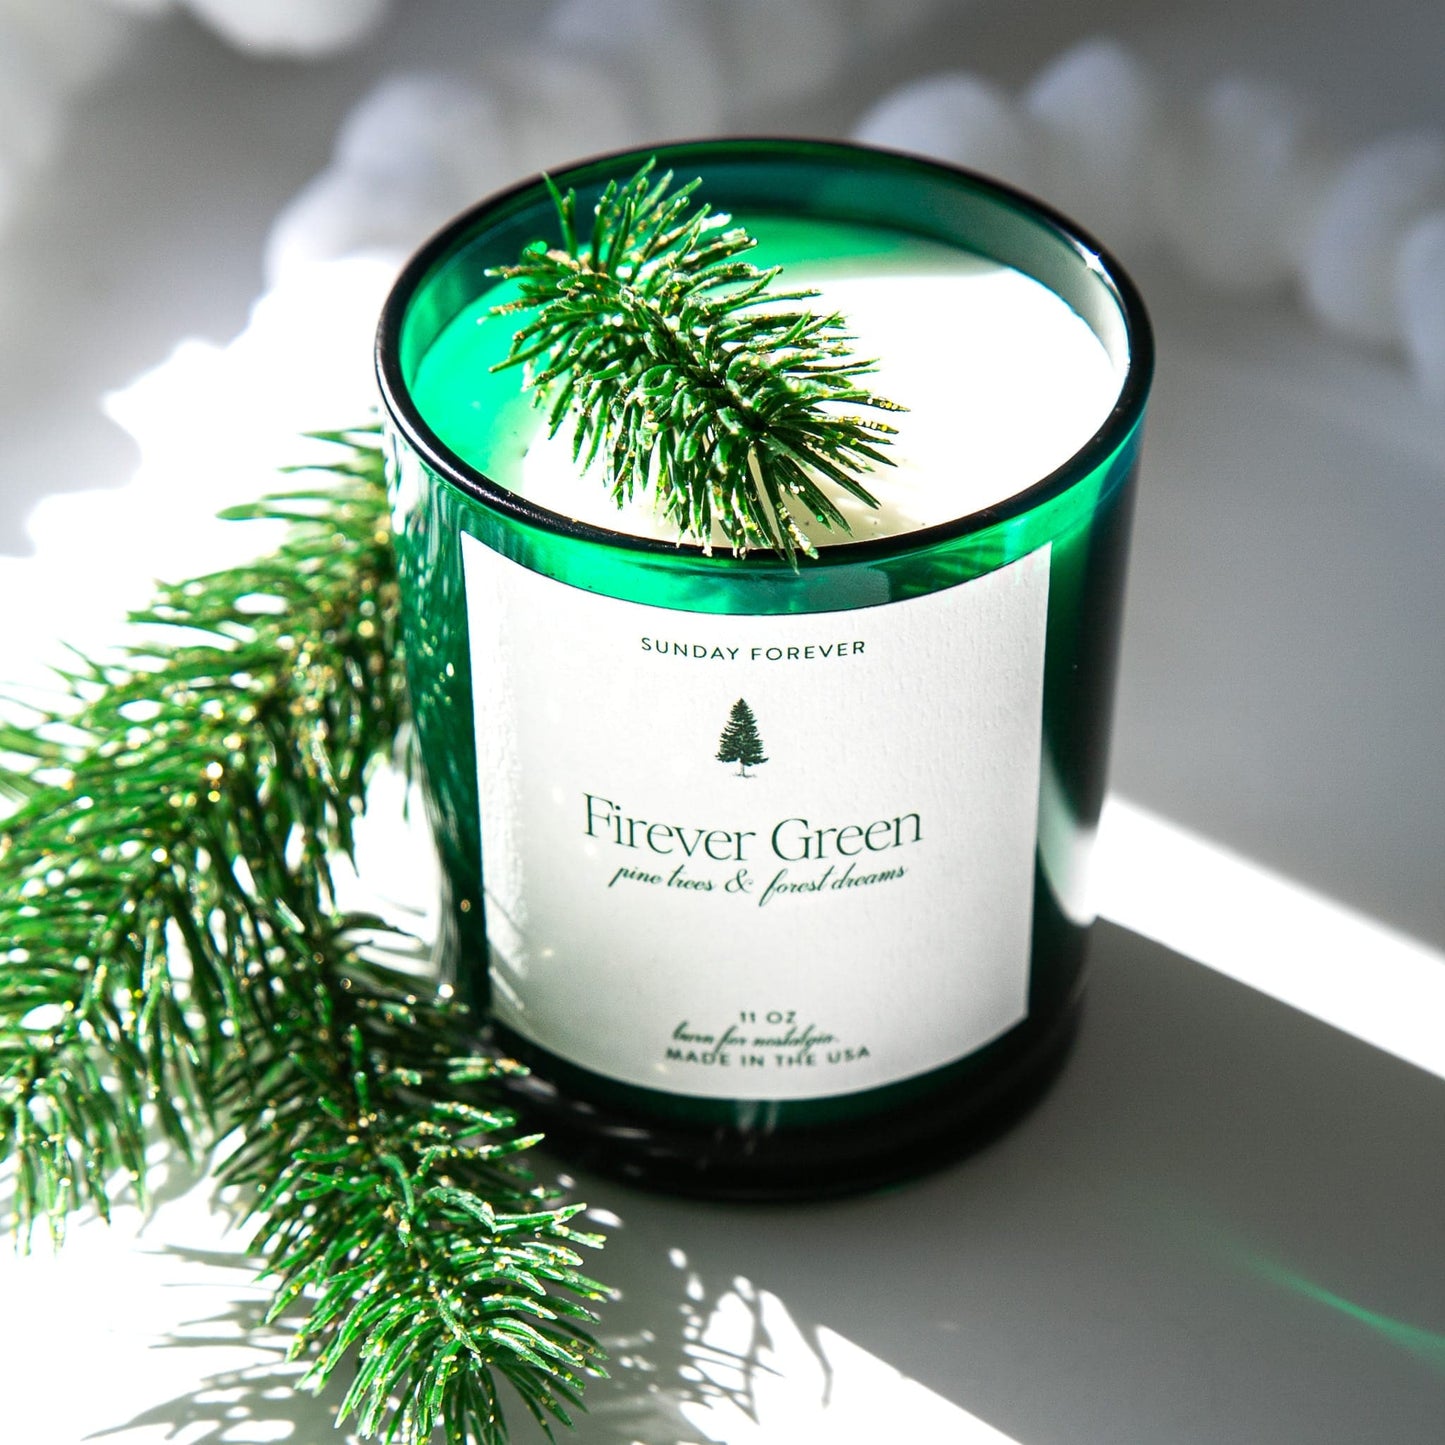 Sunday Forever Candle Firever Green Luxury Candle with Notes of Pine & Woods